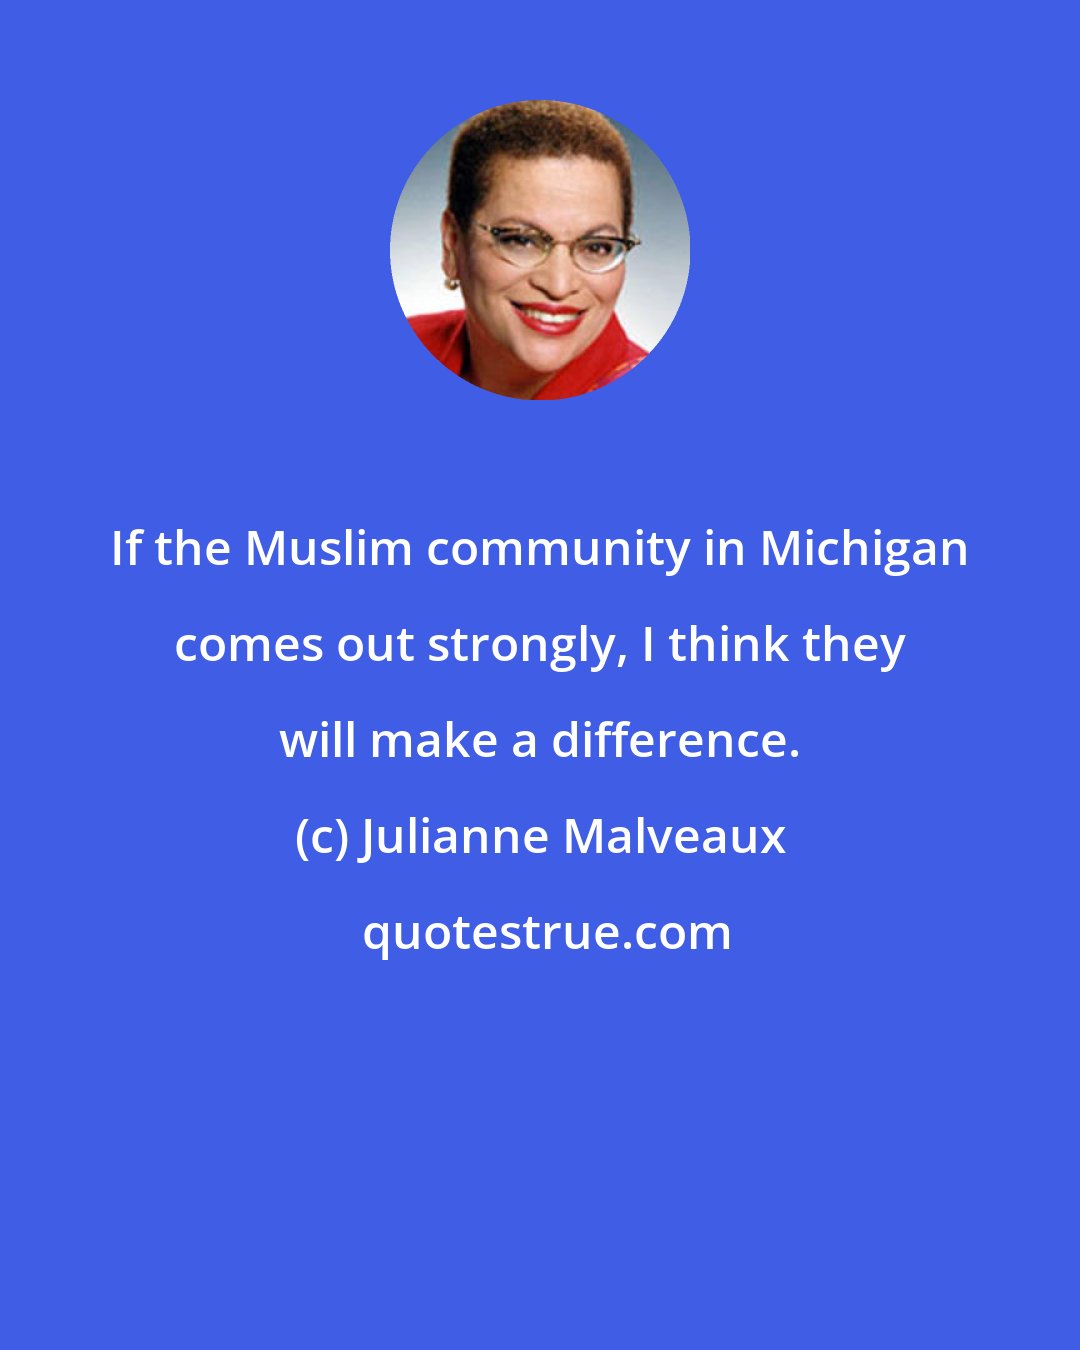 Julianne Malveaux: If the Muslim community in Michigan comes out strongly, I think they will make a difference.